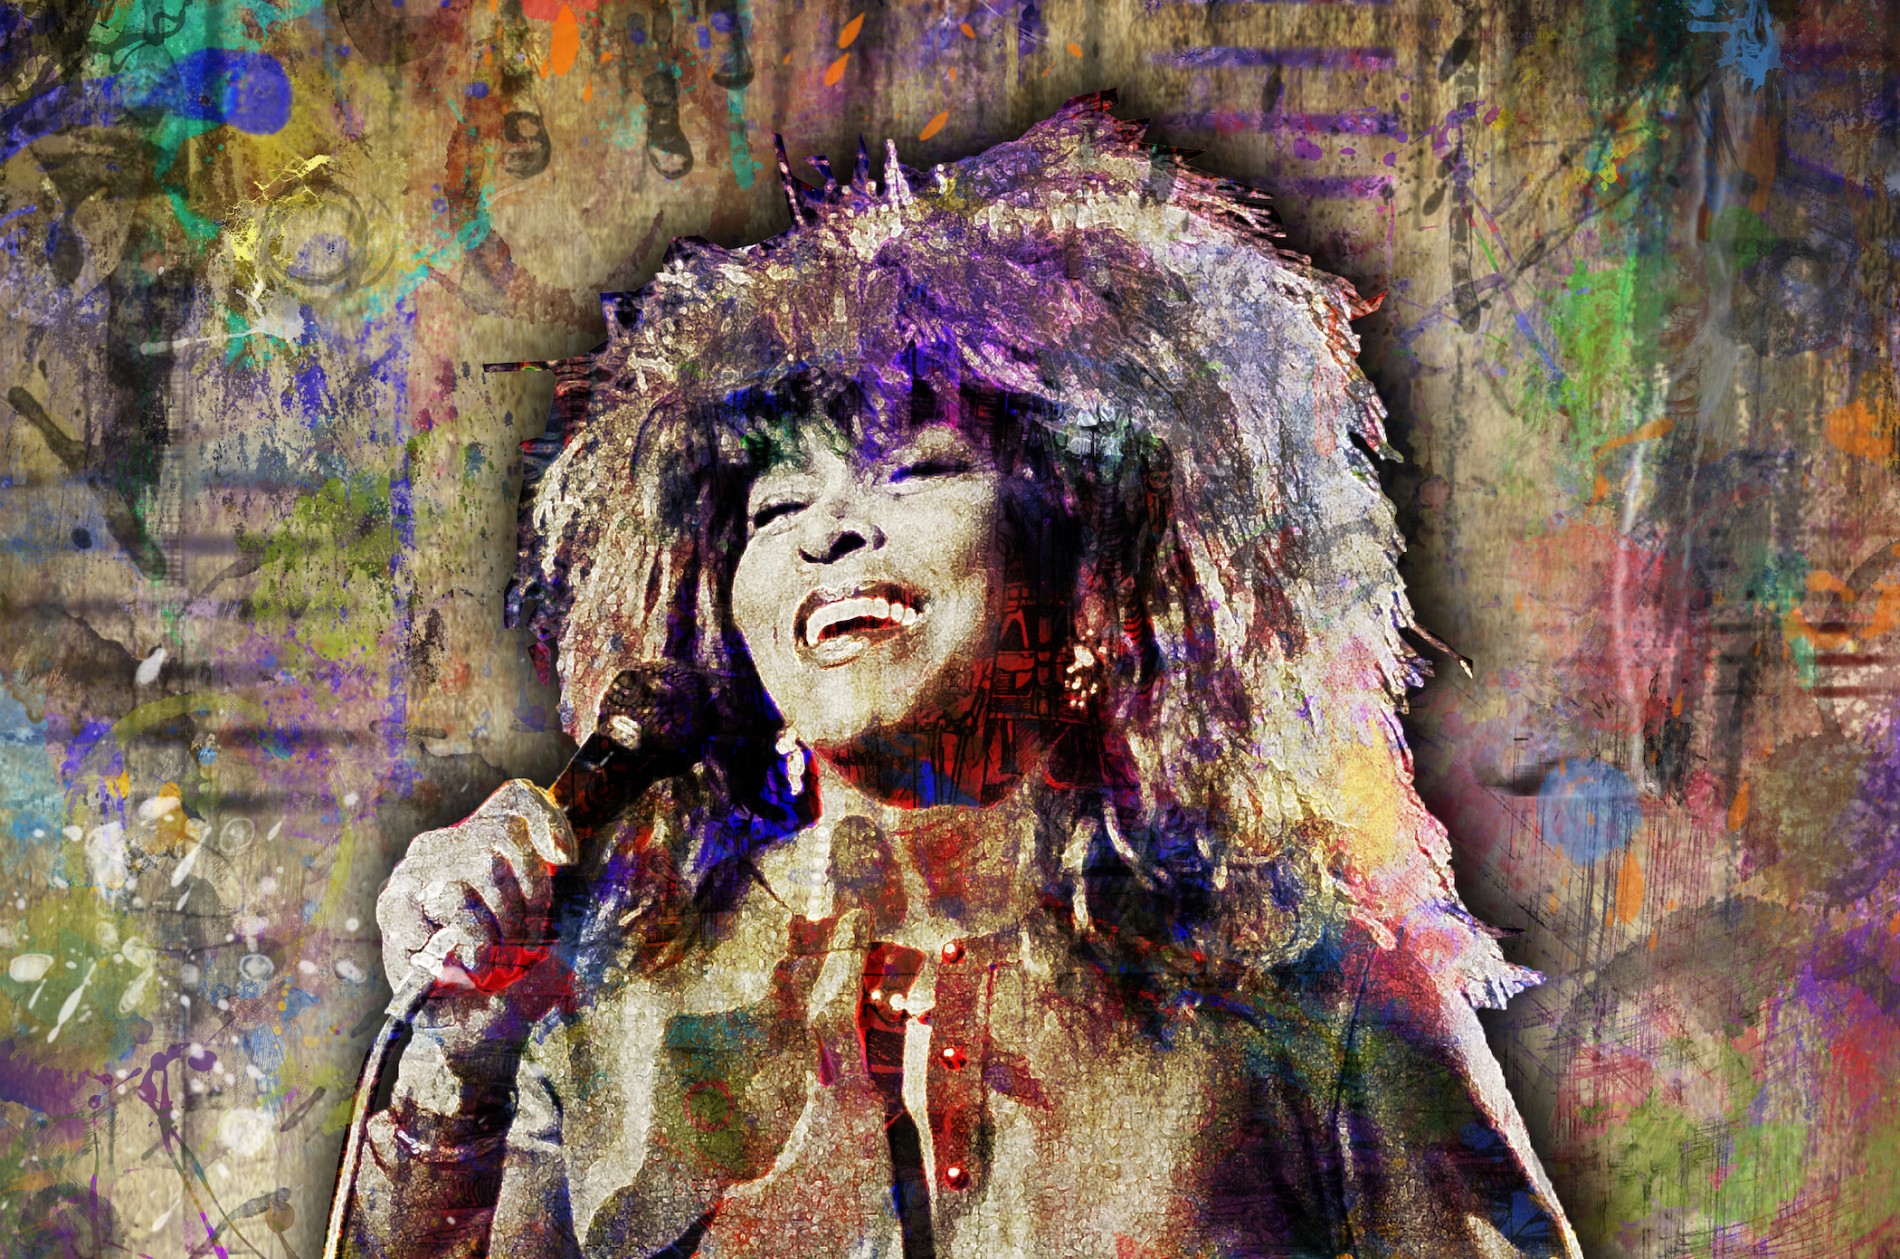 Artwork image of Tina Turner with big hair, singing into a microphone with her eyes shut.